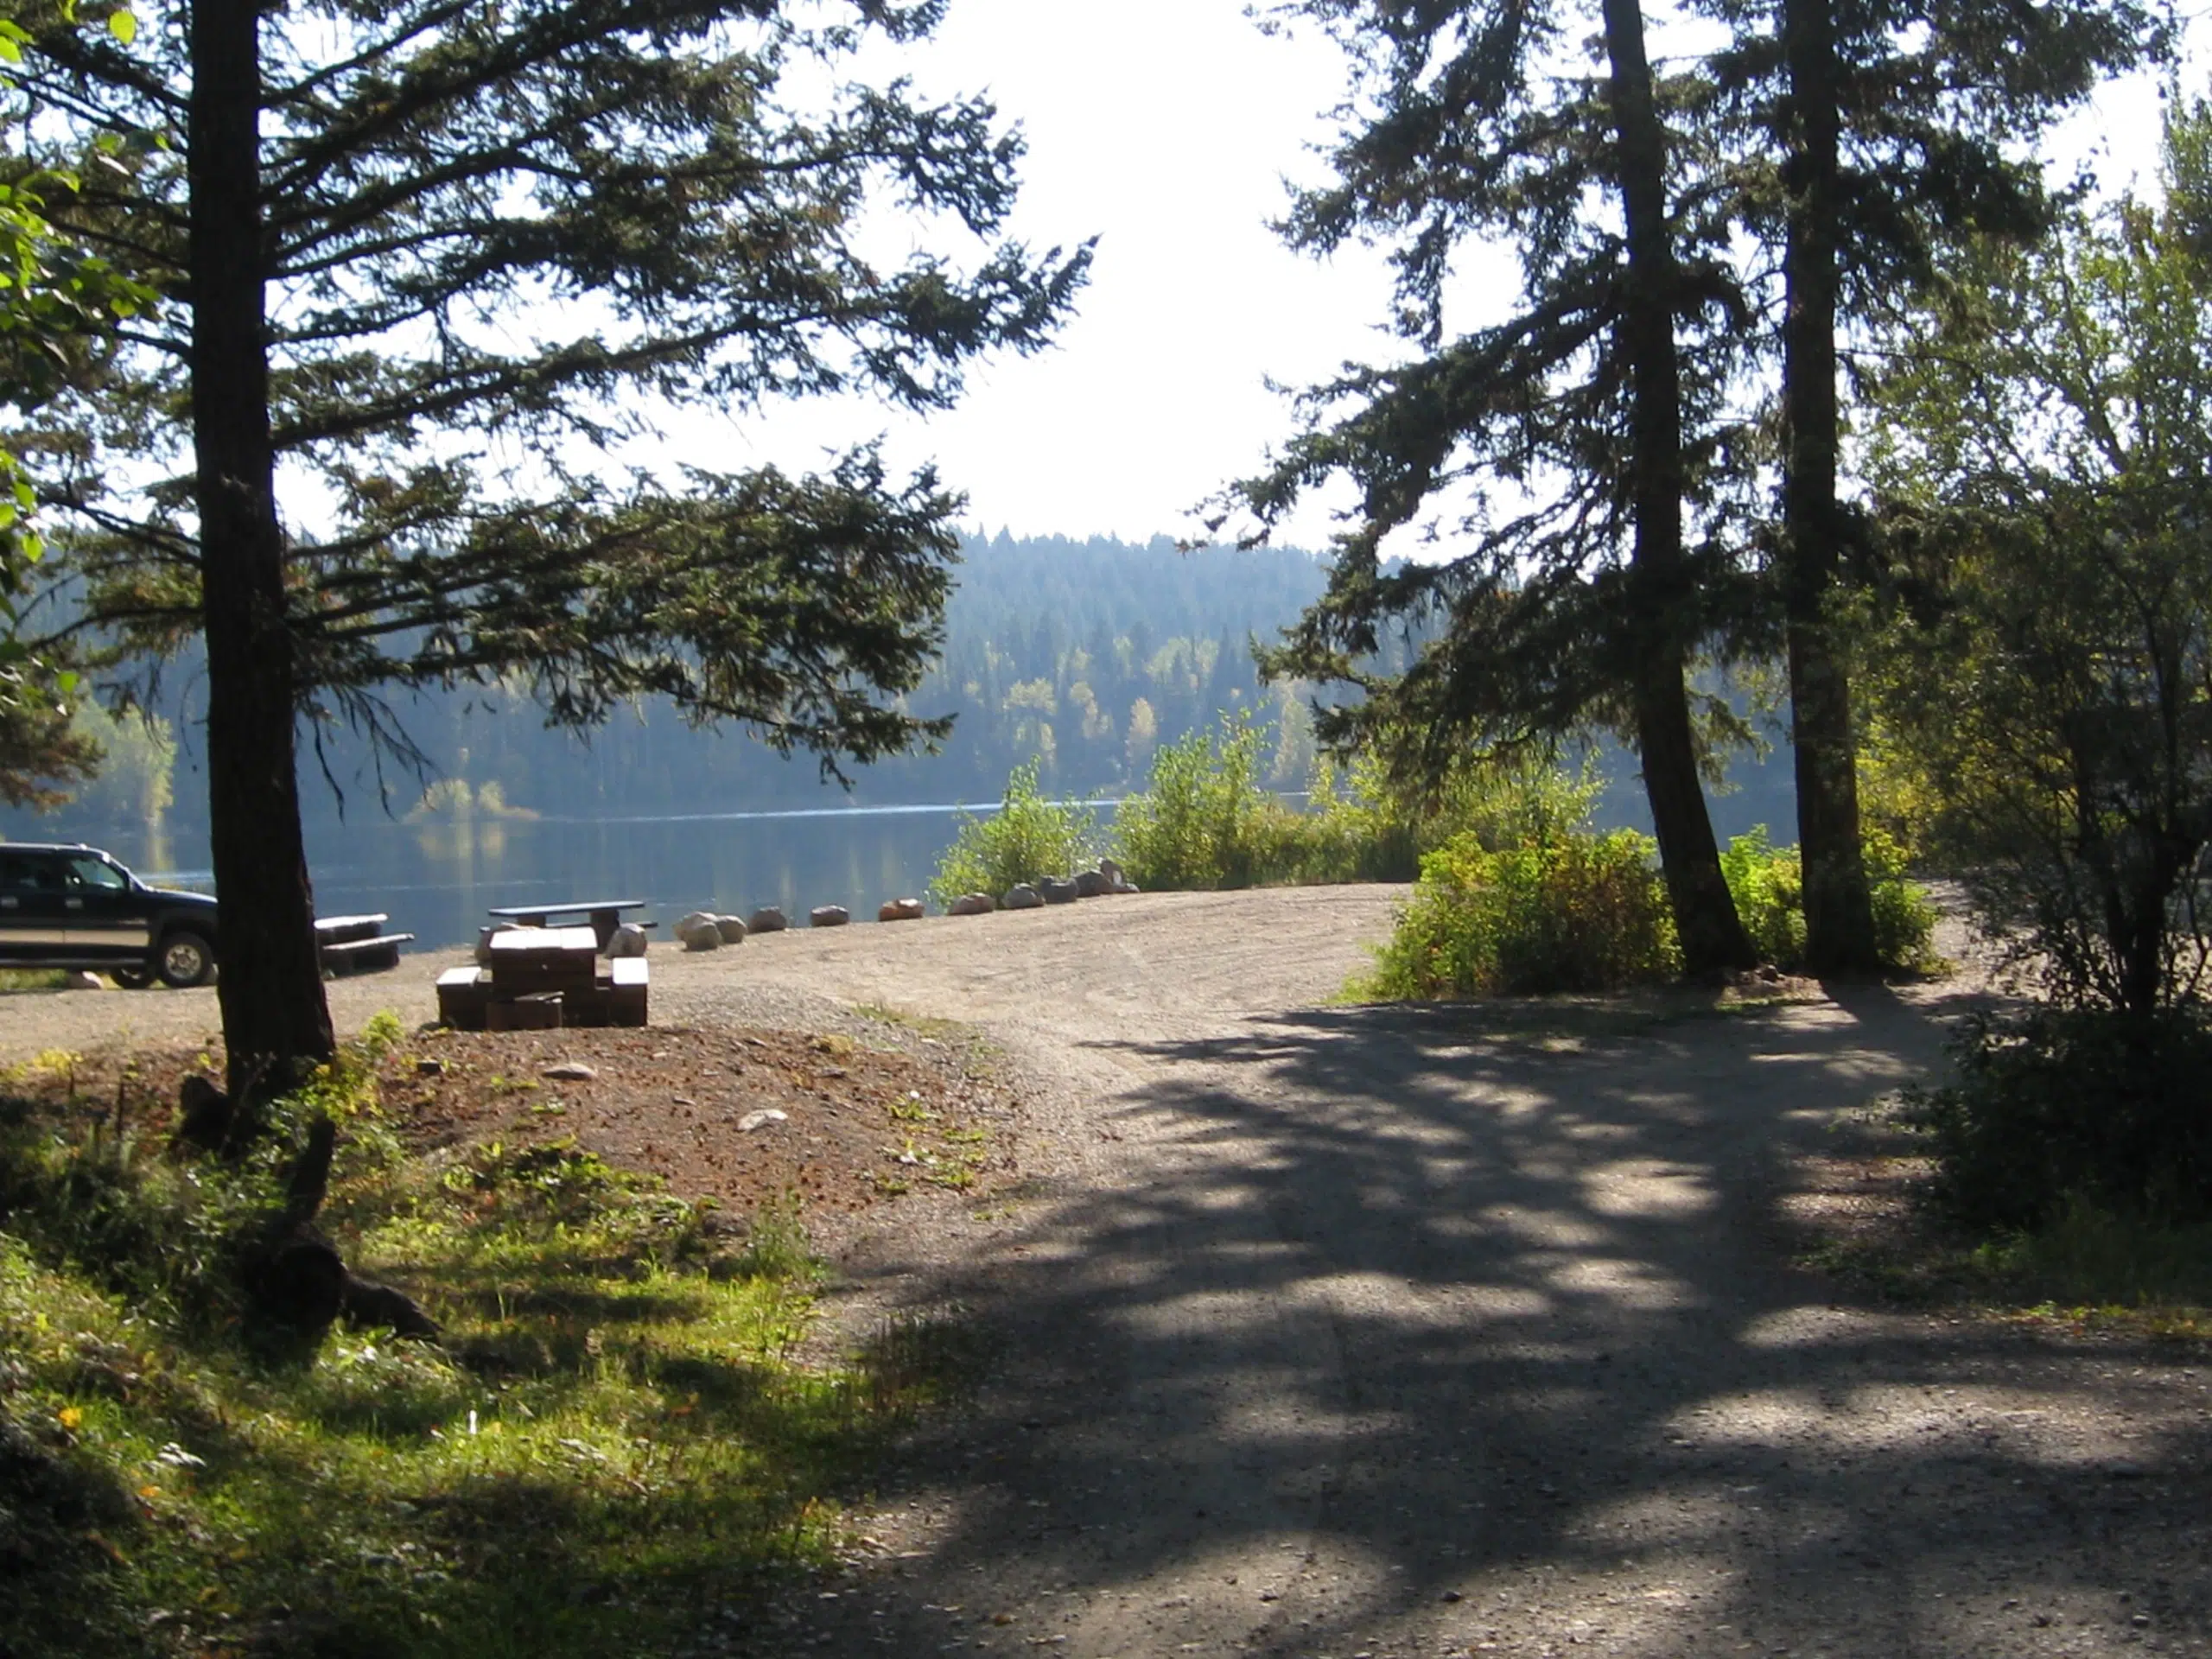 Improvements for Isobel Lake Trail system have boosted accessiblity